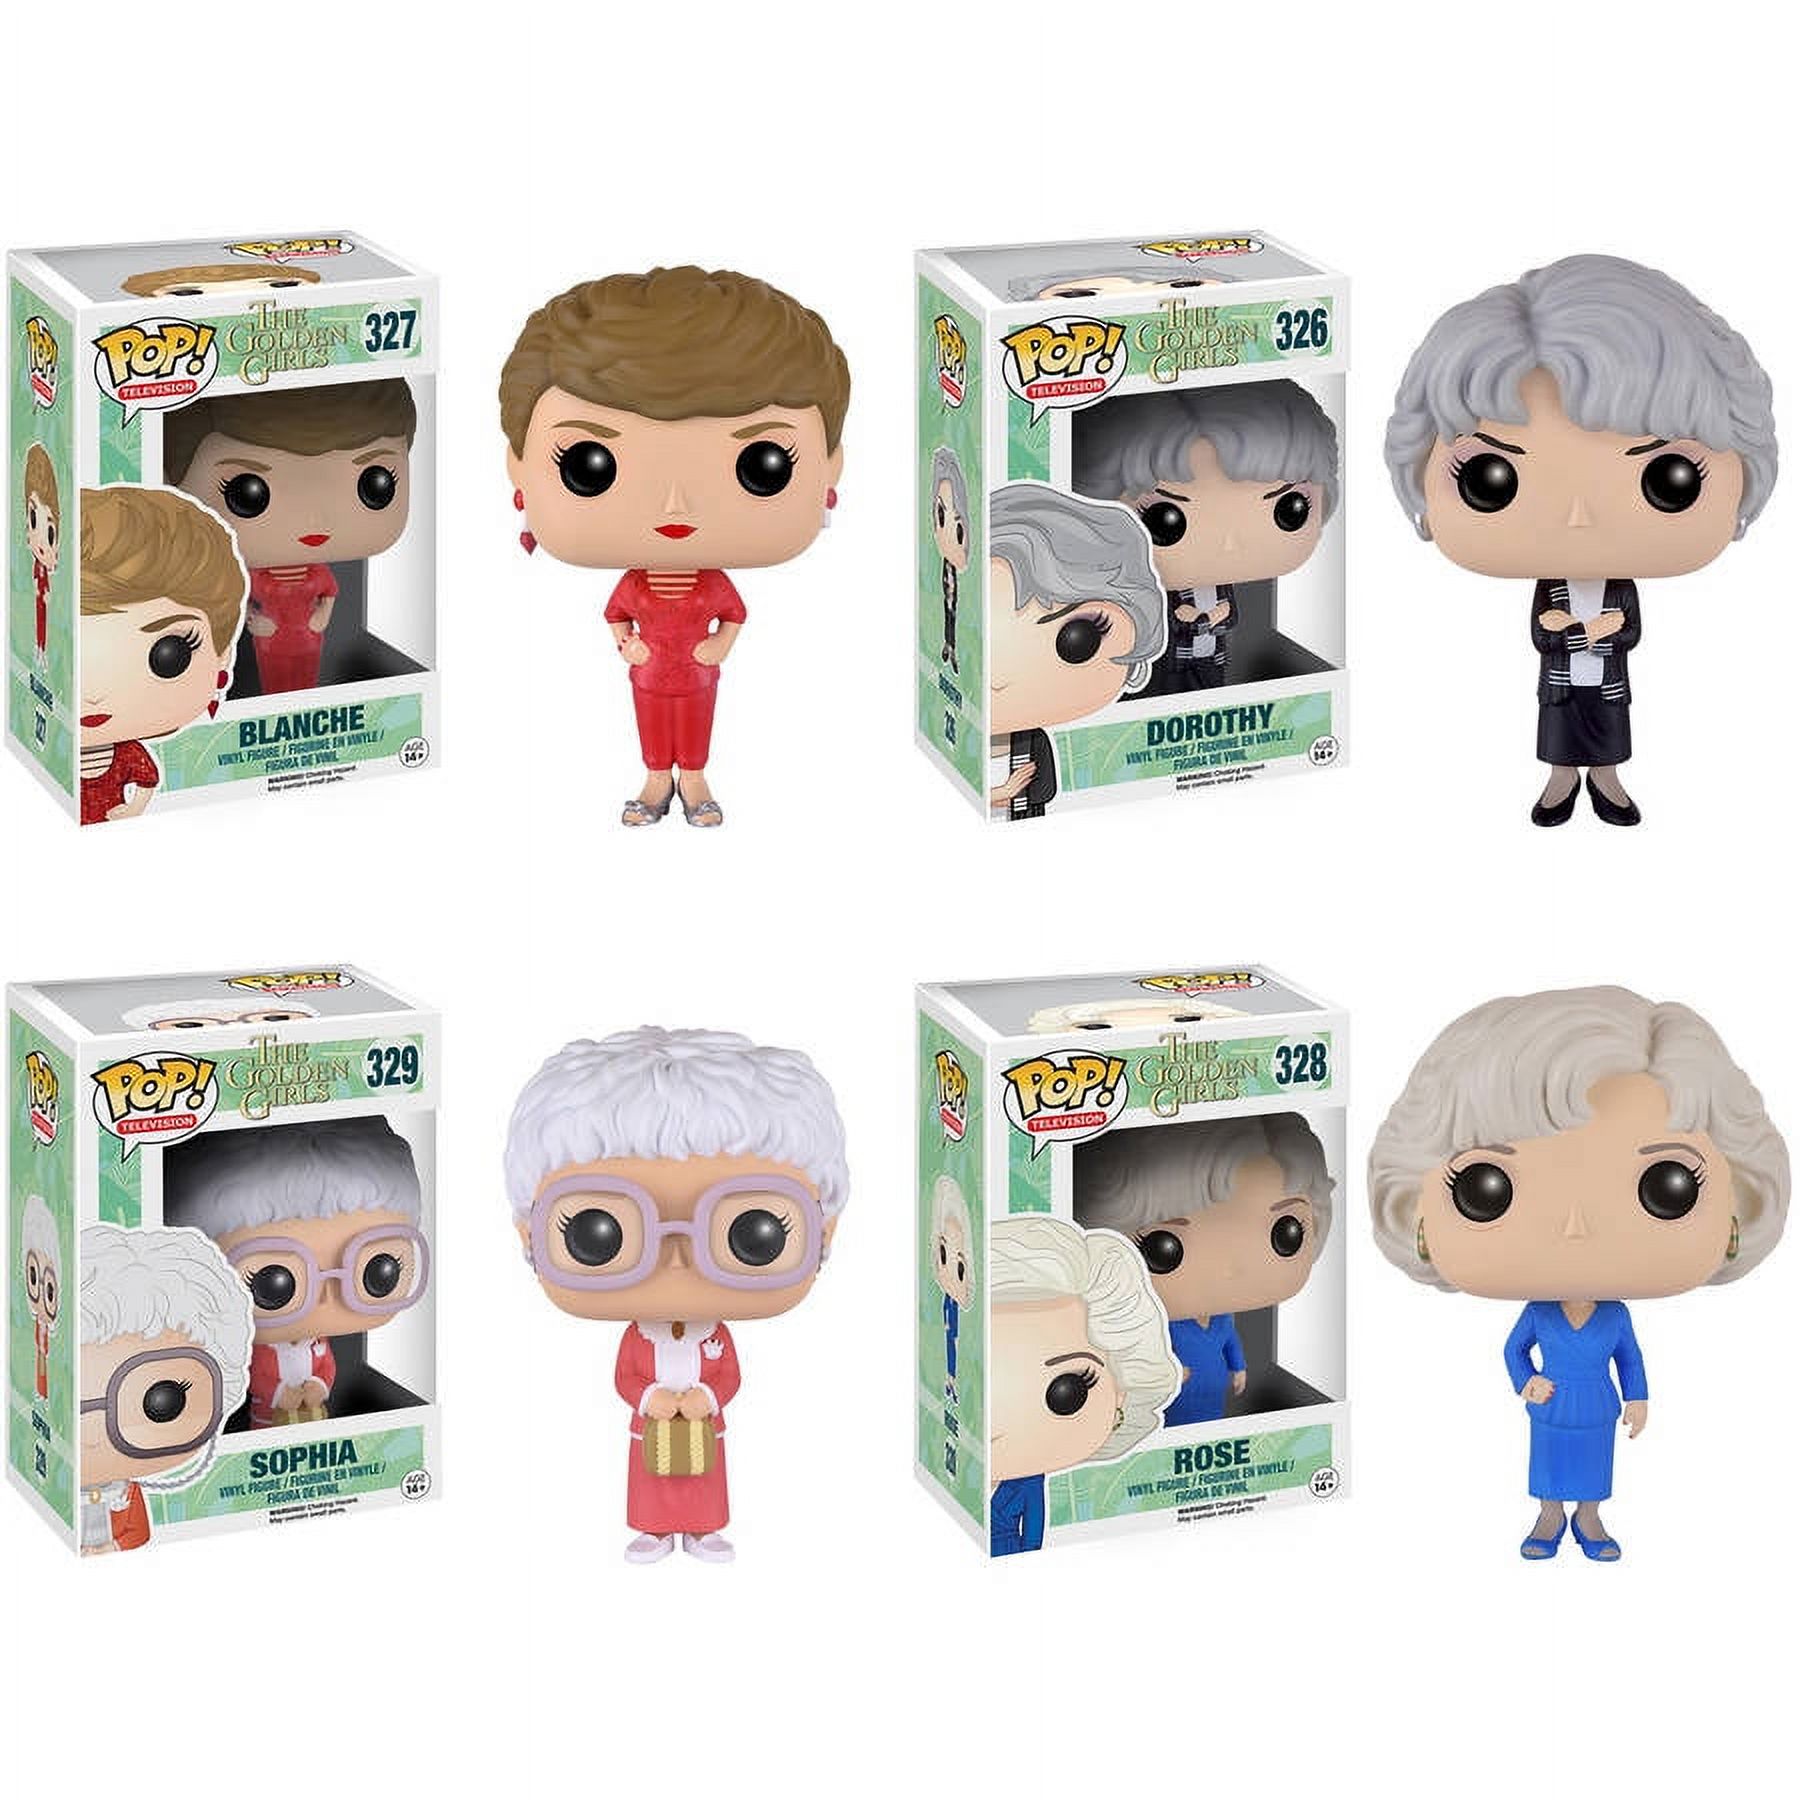 Funko POP! Golden Girls TV Collectors Set Featuring Sophia, Rose, Blanche and Dorothy - image 1 of 5